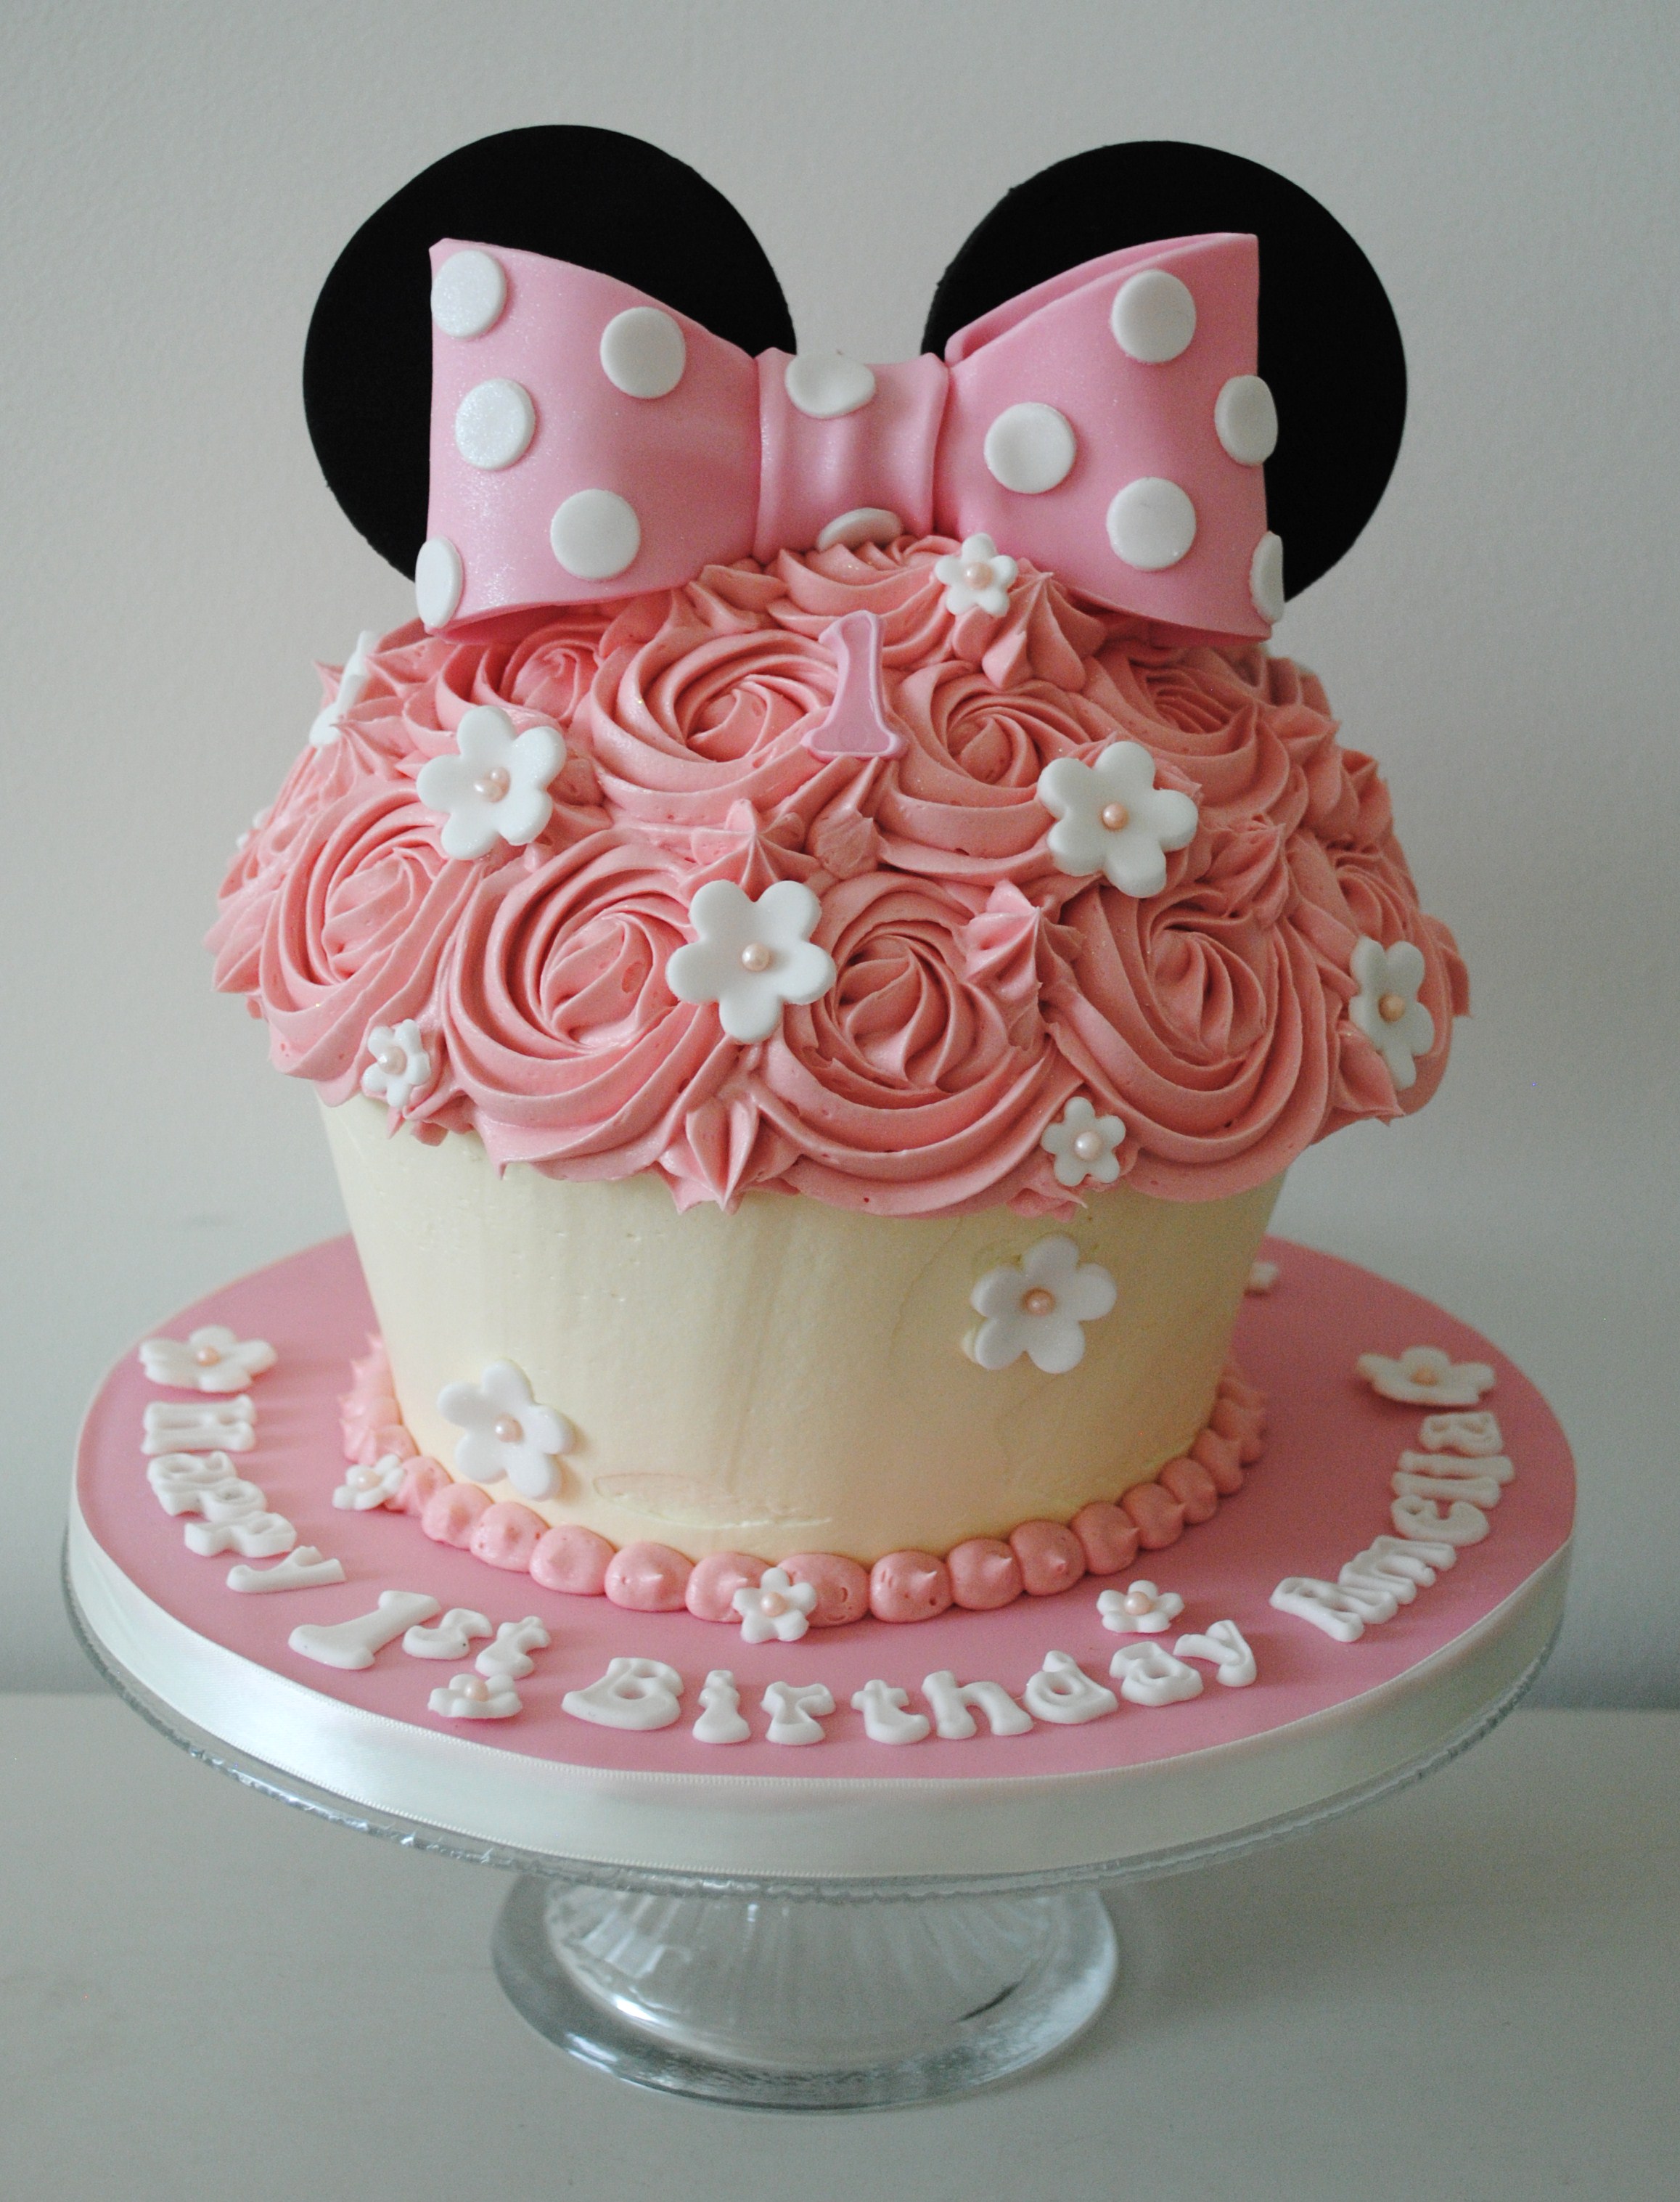 Giant Minnie Mouse Cakes and Cupcakes